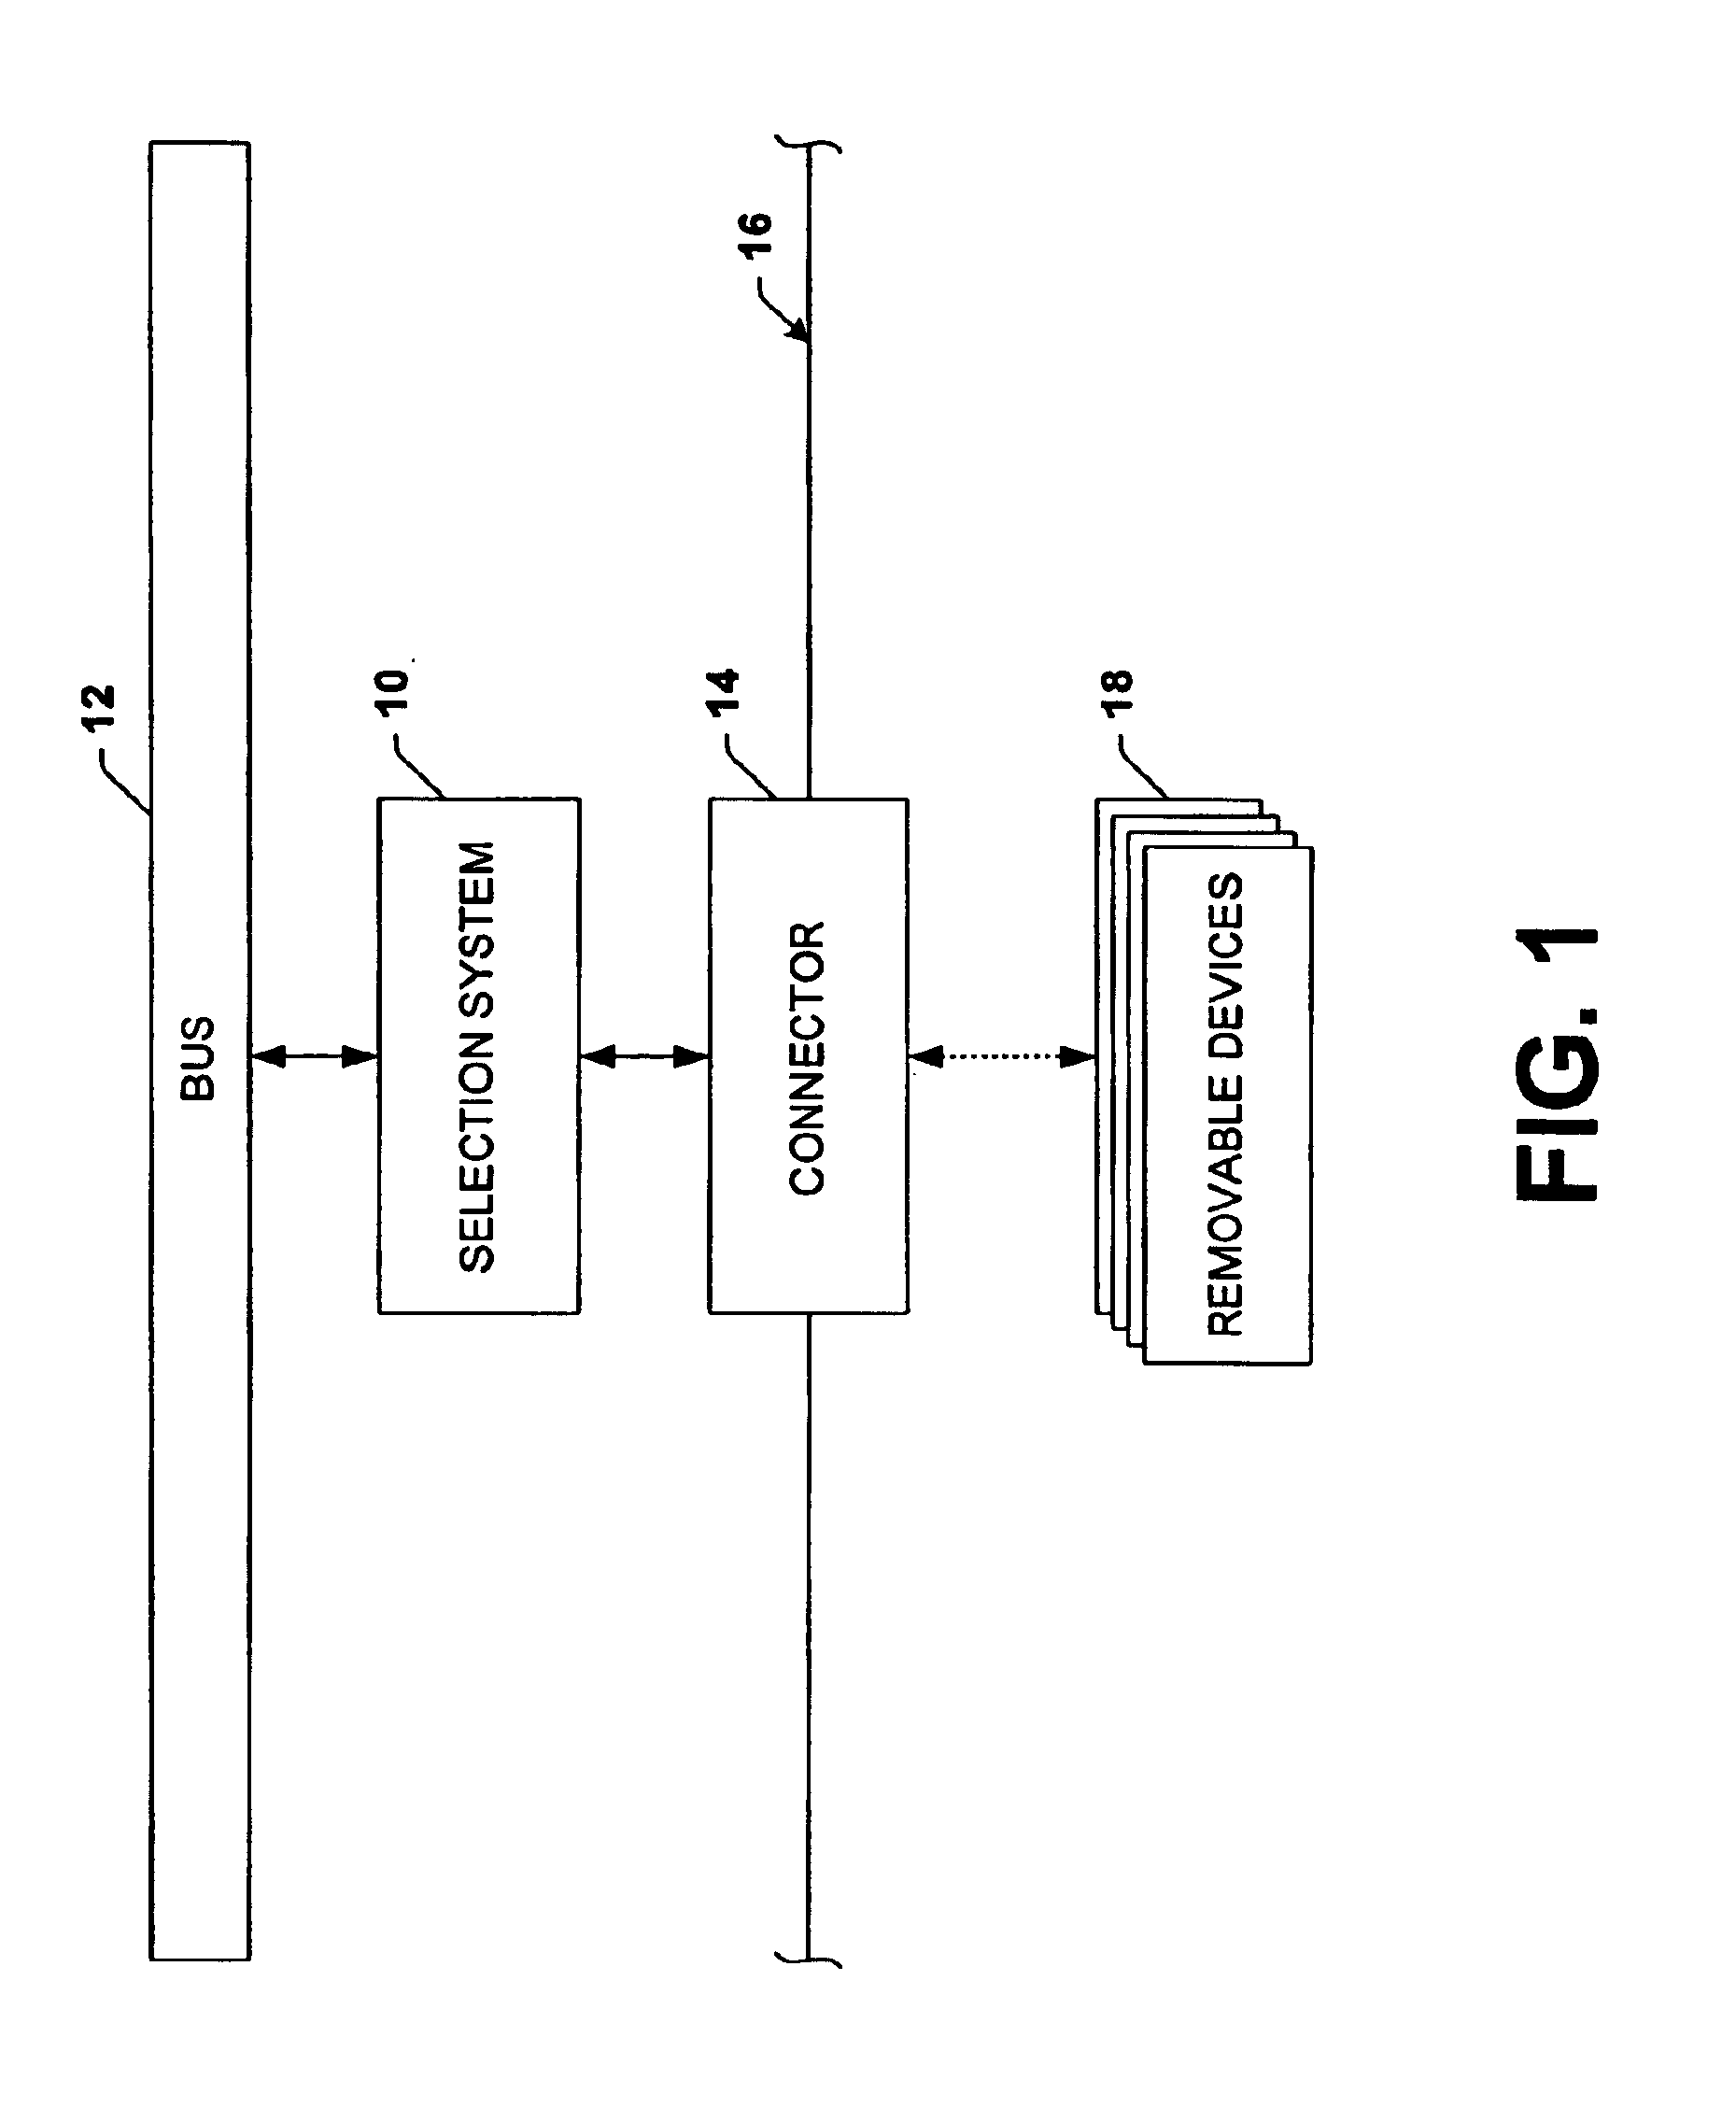 System and method to facilitate native use of small form factor devices